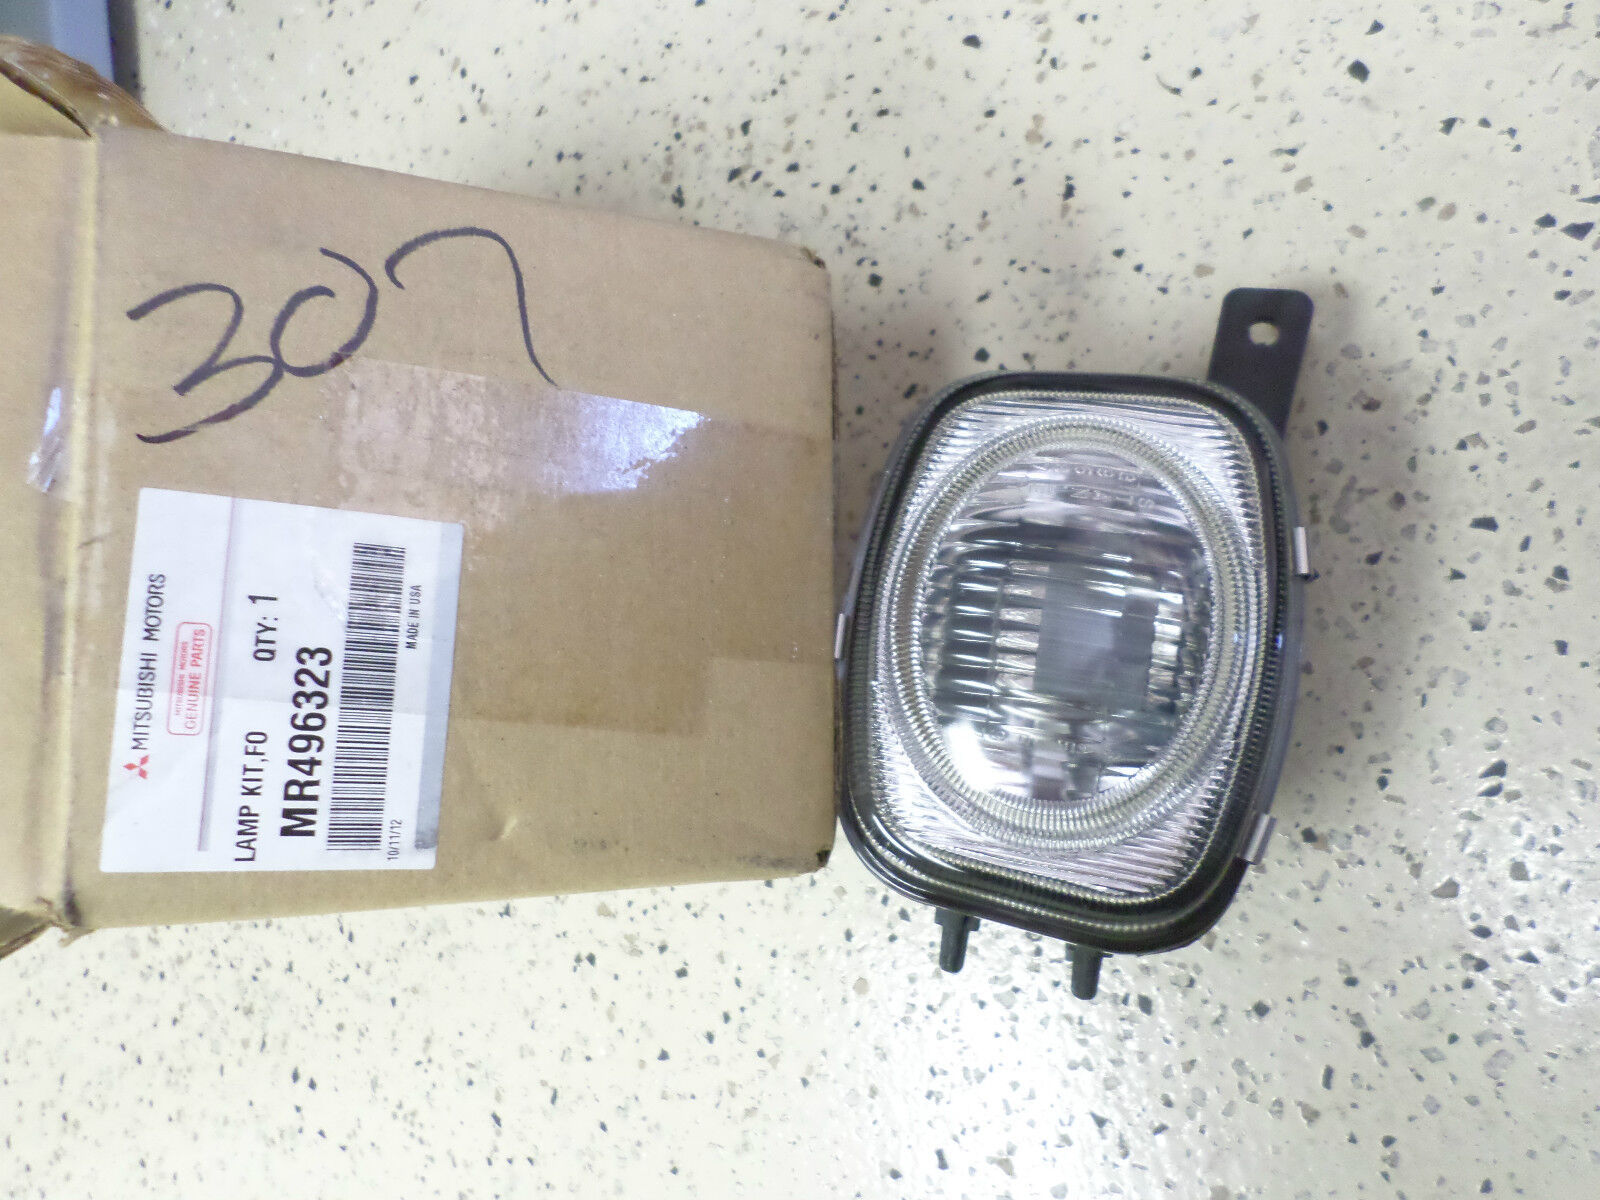 Primary image for New OEM Fog Light Lamp Driving Mitsubishi Eclipse 2000-2002 LH MR496323